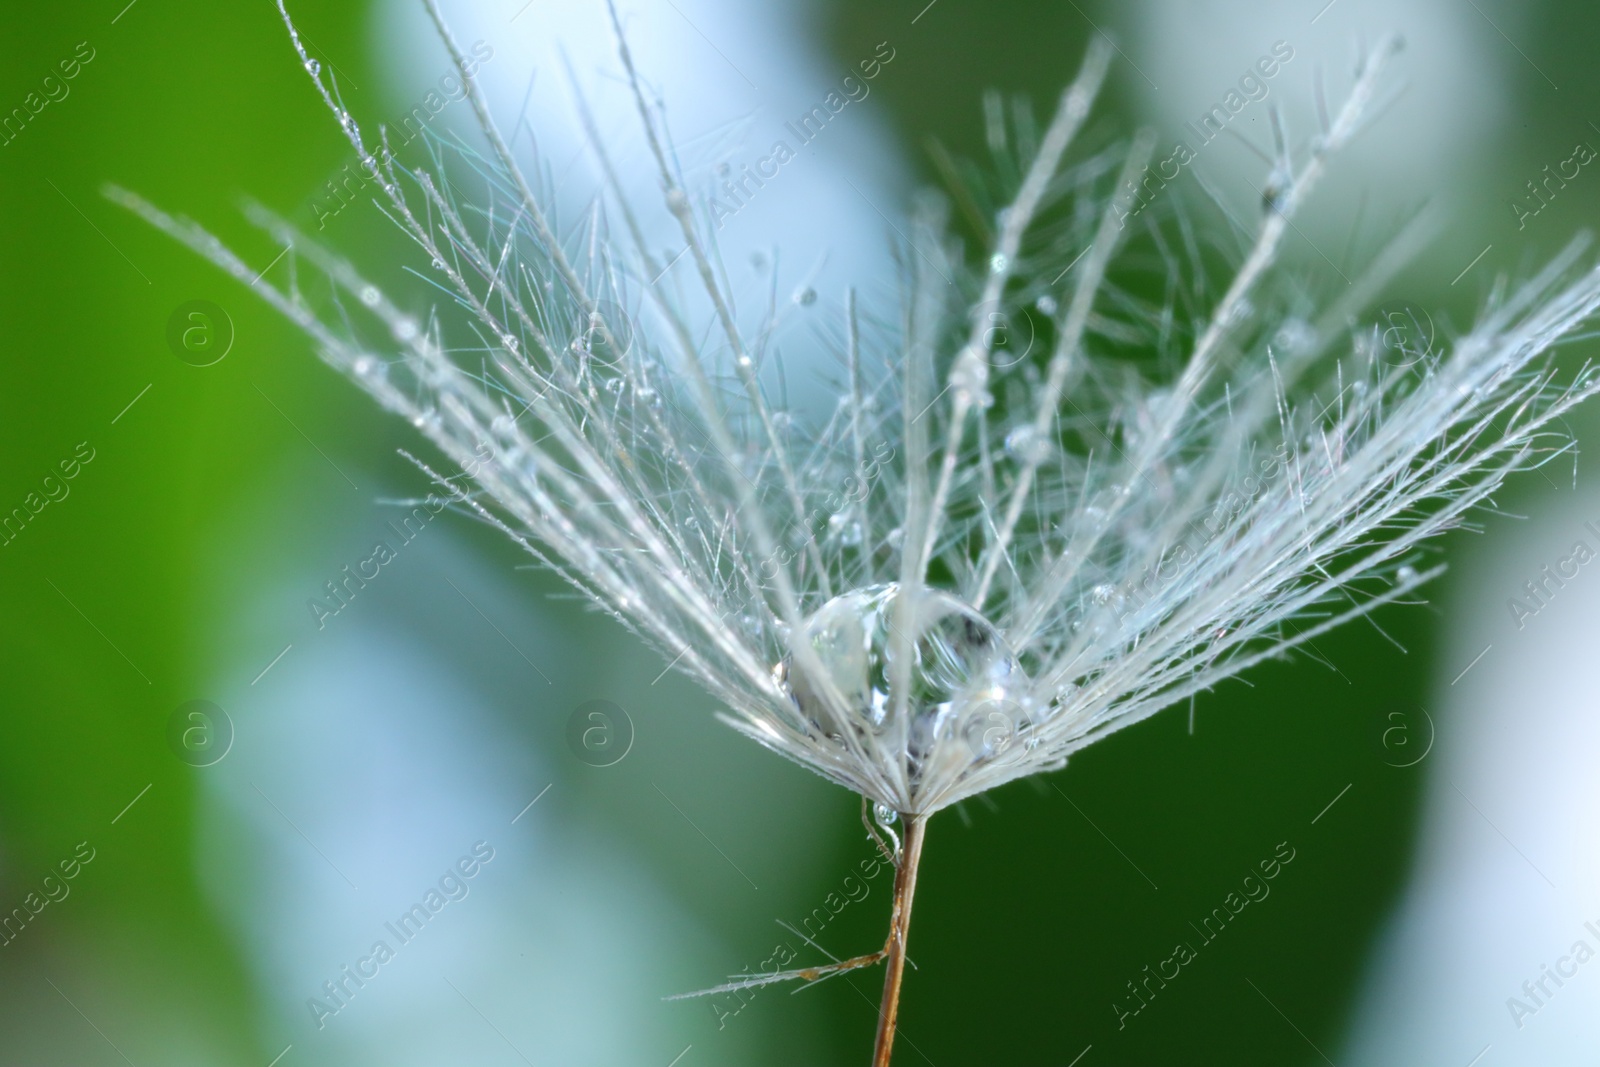 Photo of Seeds of dandelion flower with water drop on blurred green background, macro photo